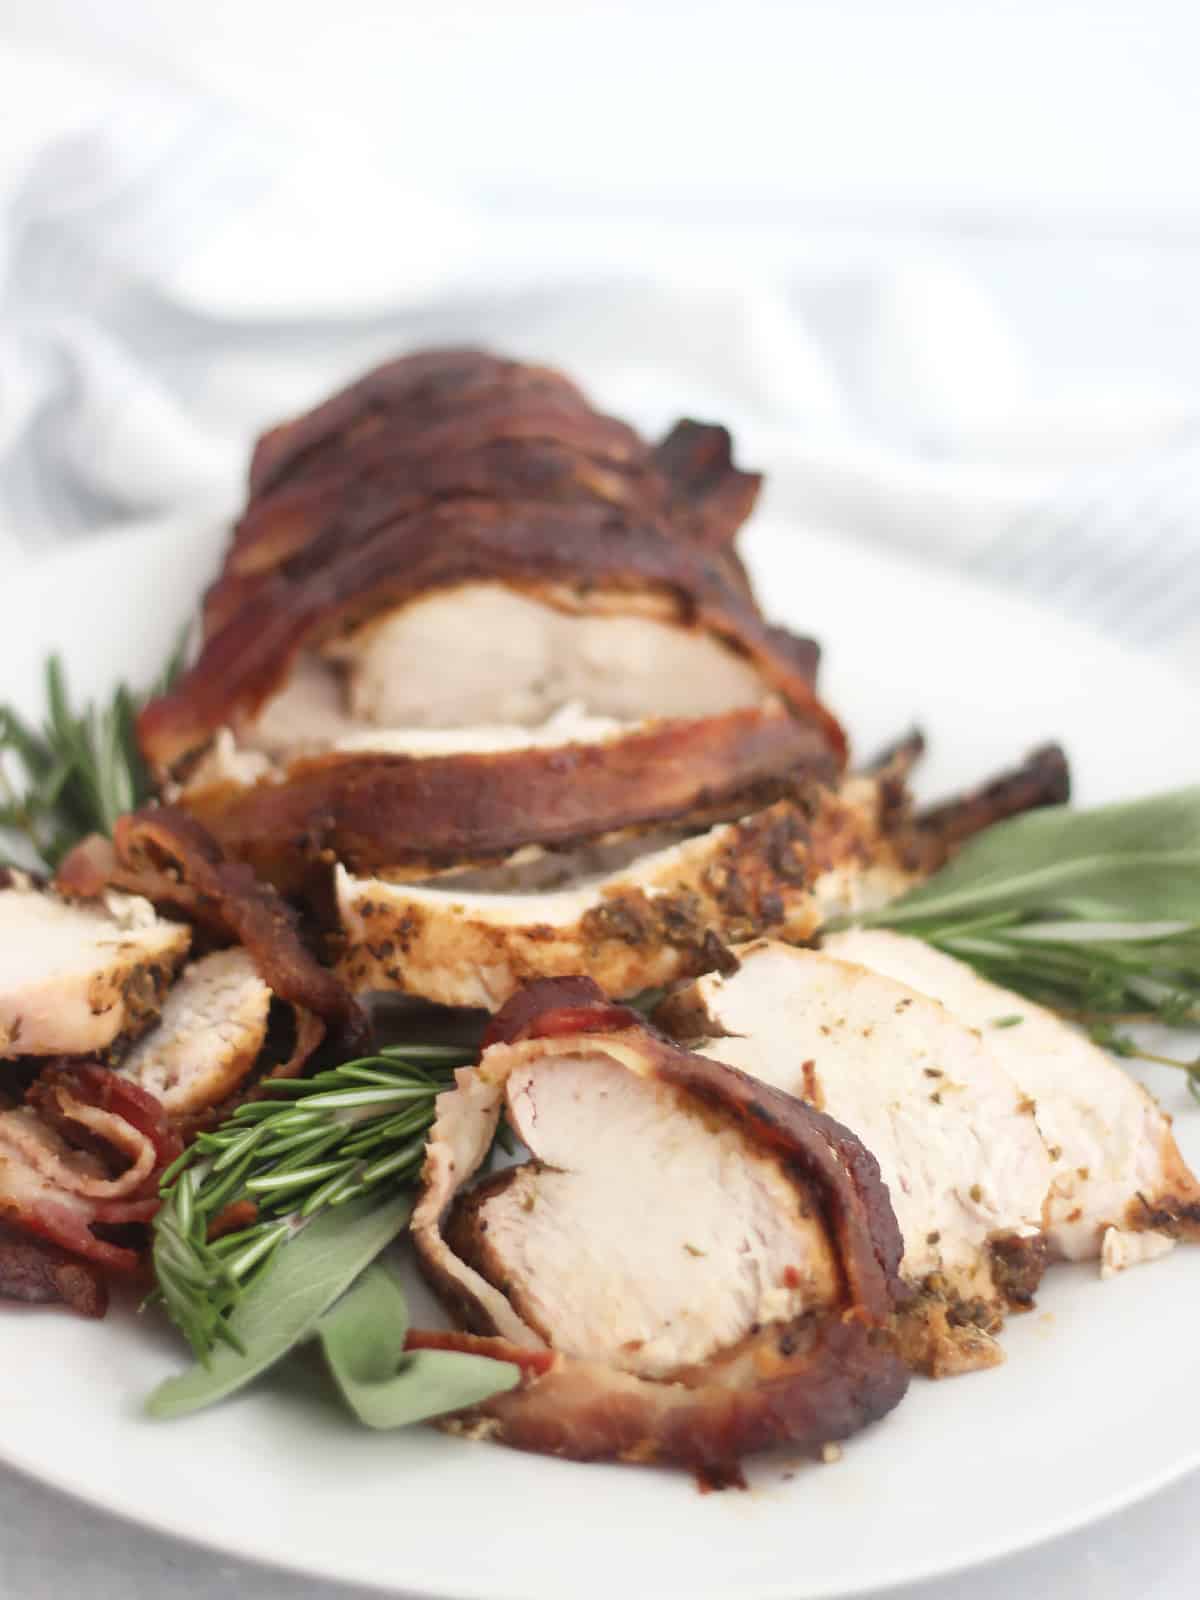 Carved air fried turkey breast served on top of fresh rosemary and sage.